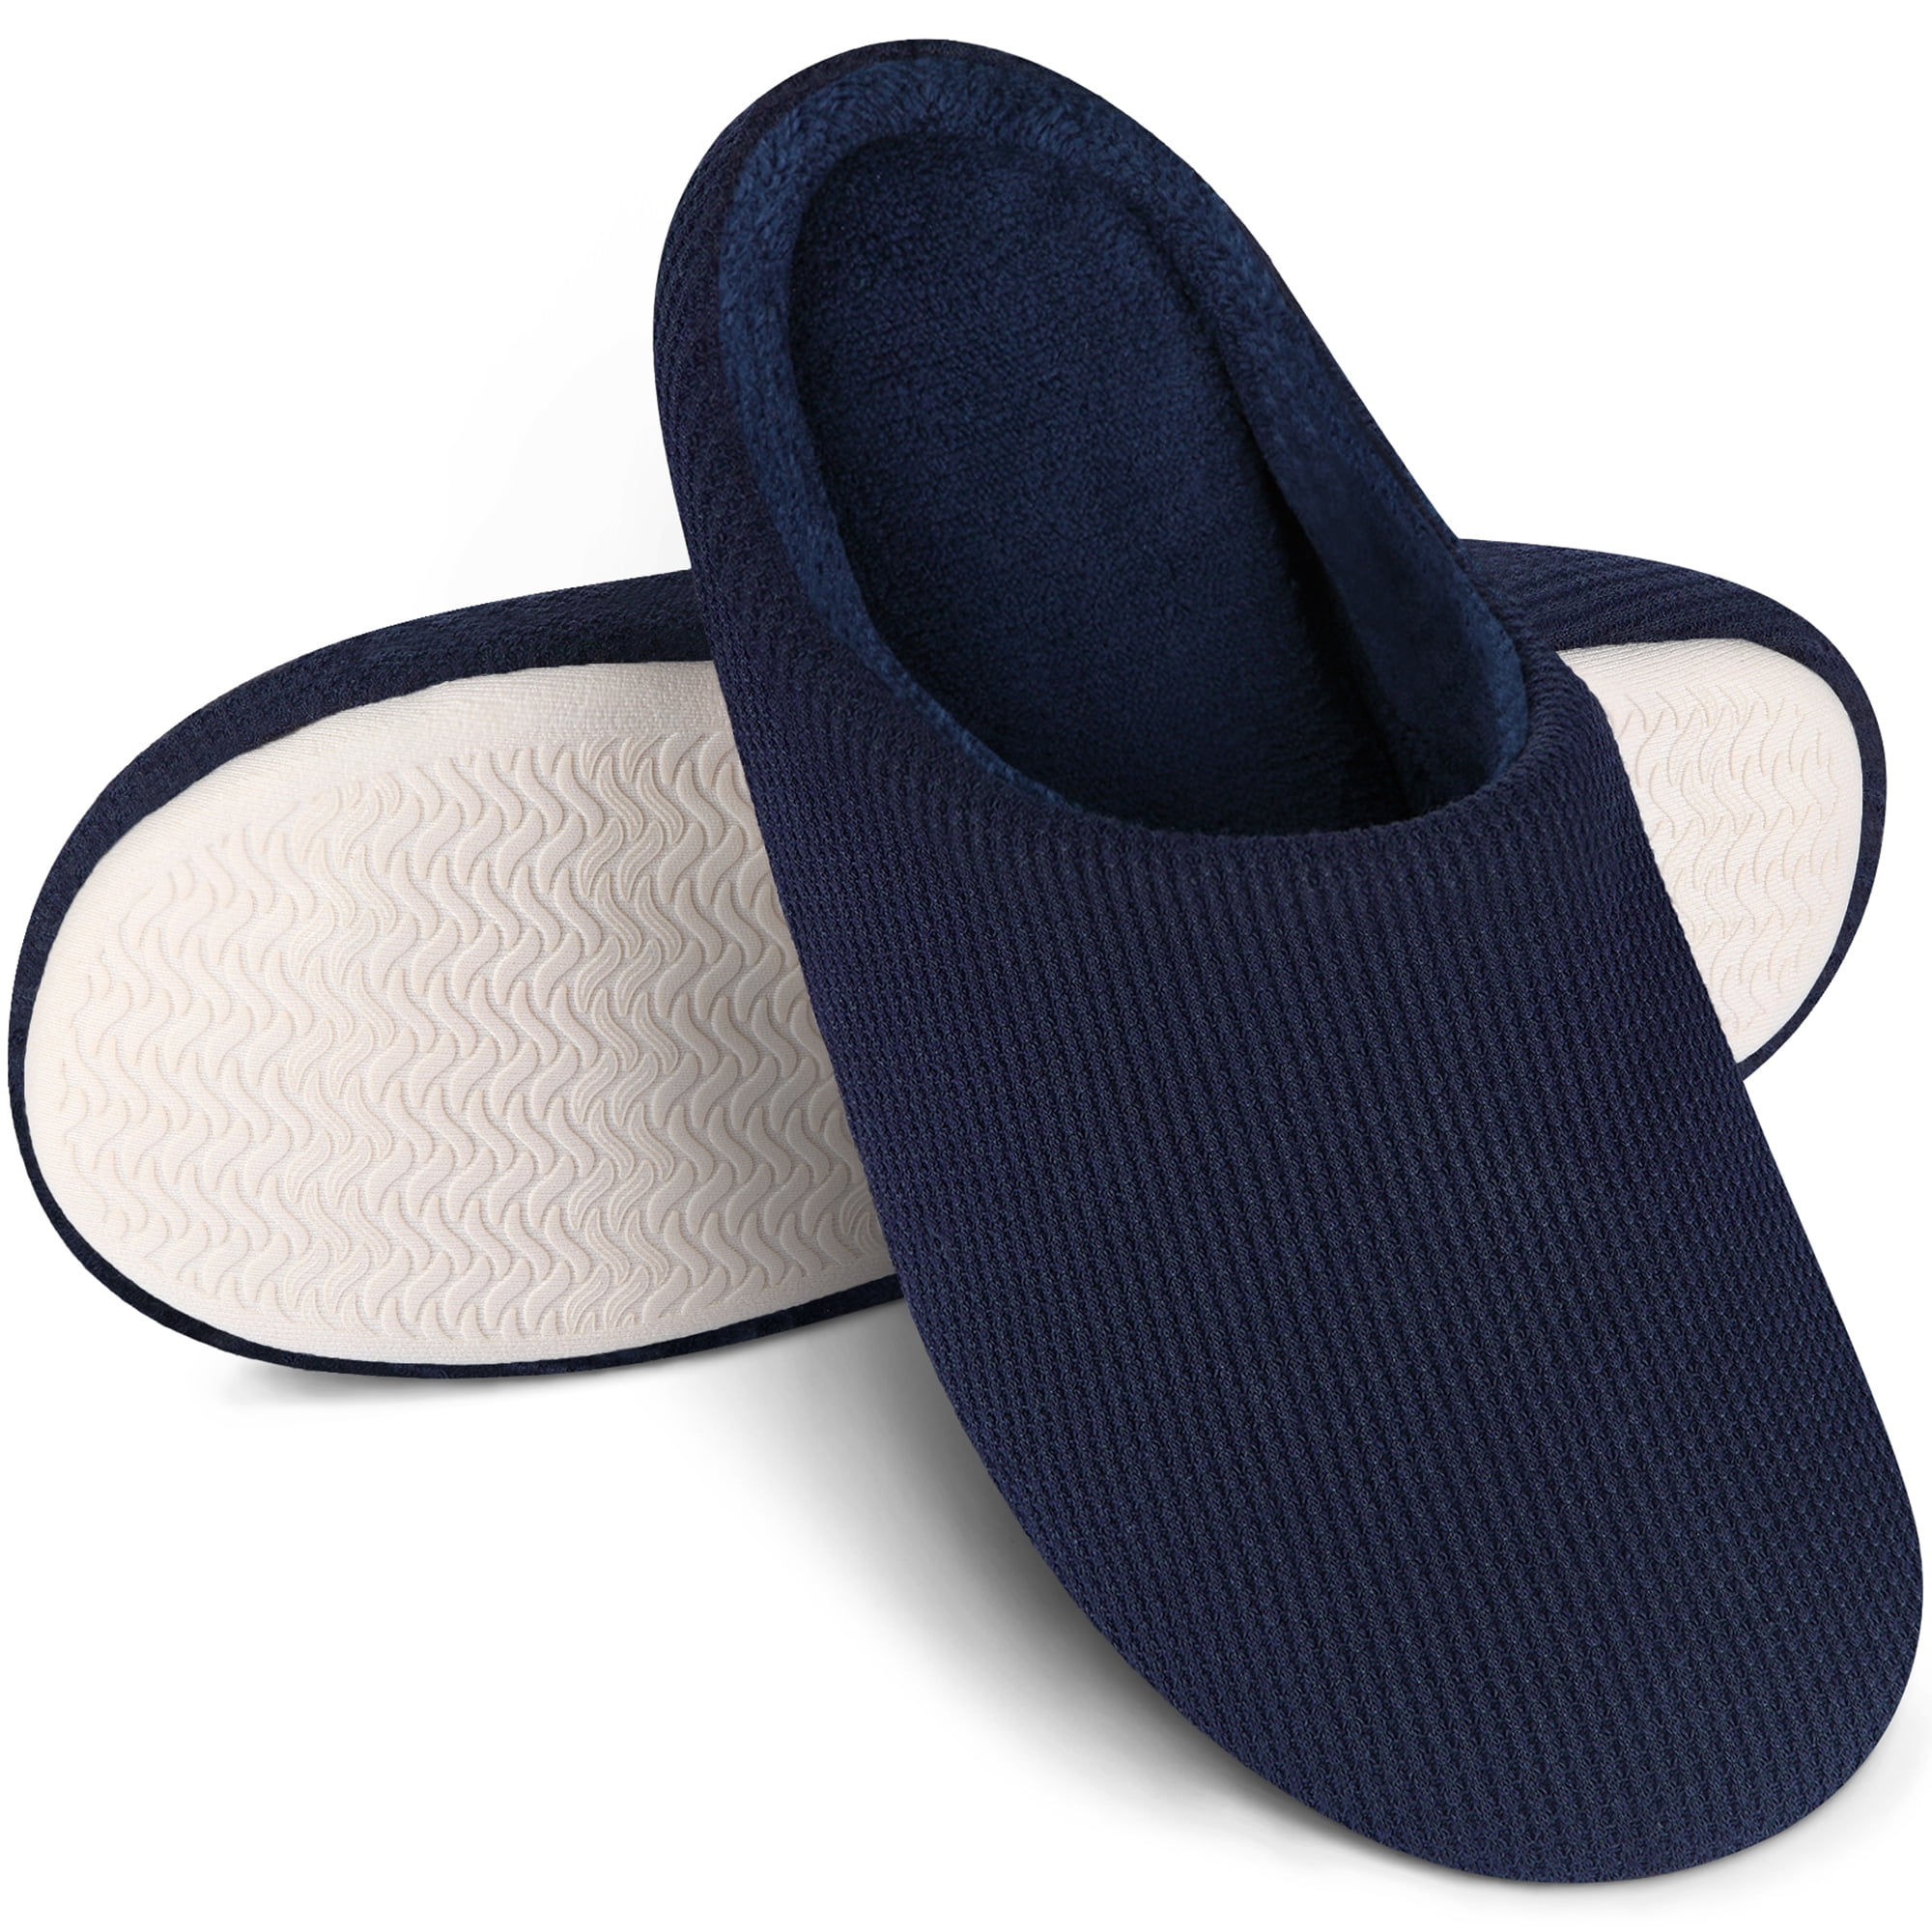 Mens Shoes Slip-on shoes Slippers Hay Cotton Waffle Slippers in Blue for Men 